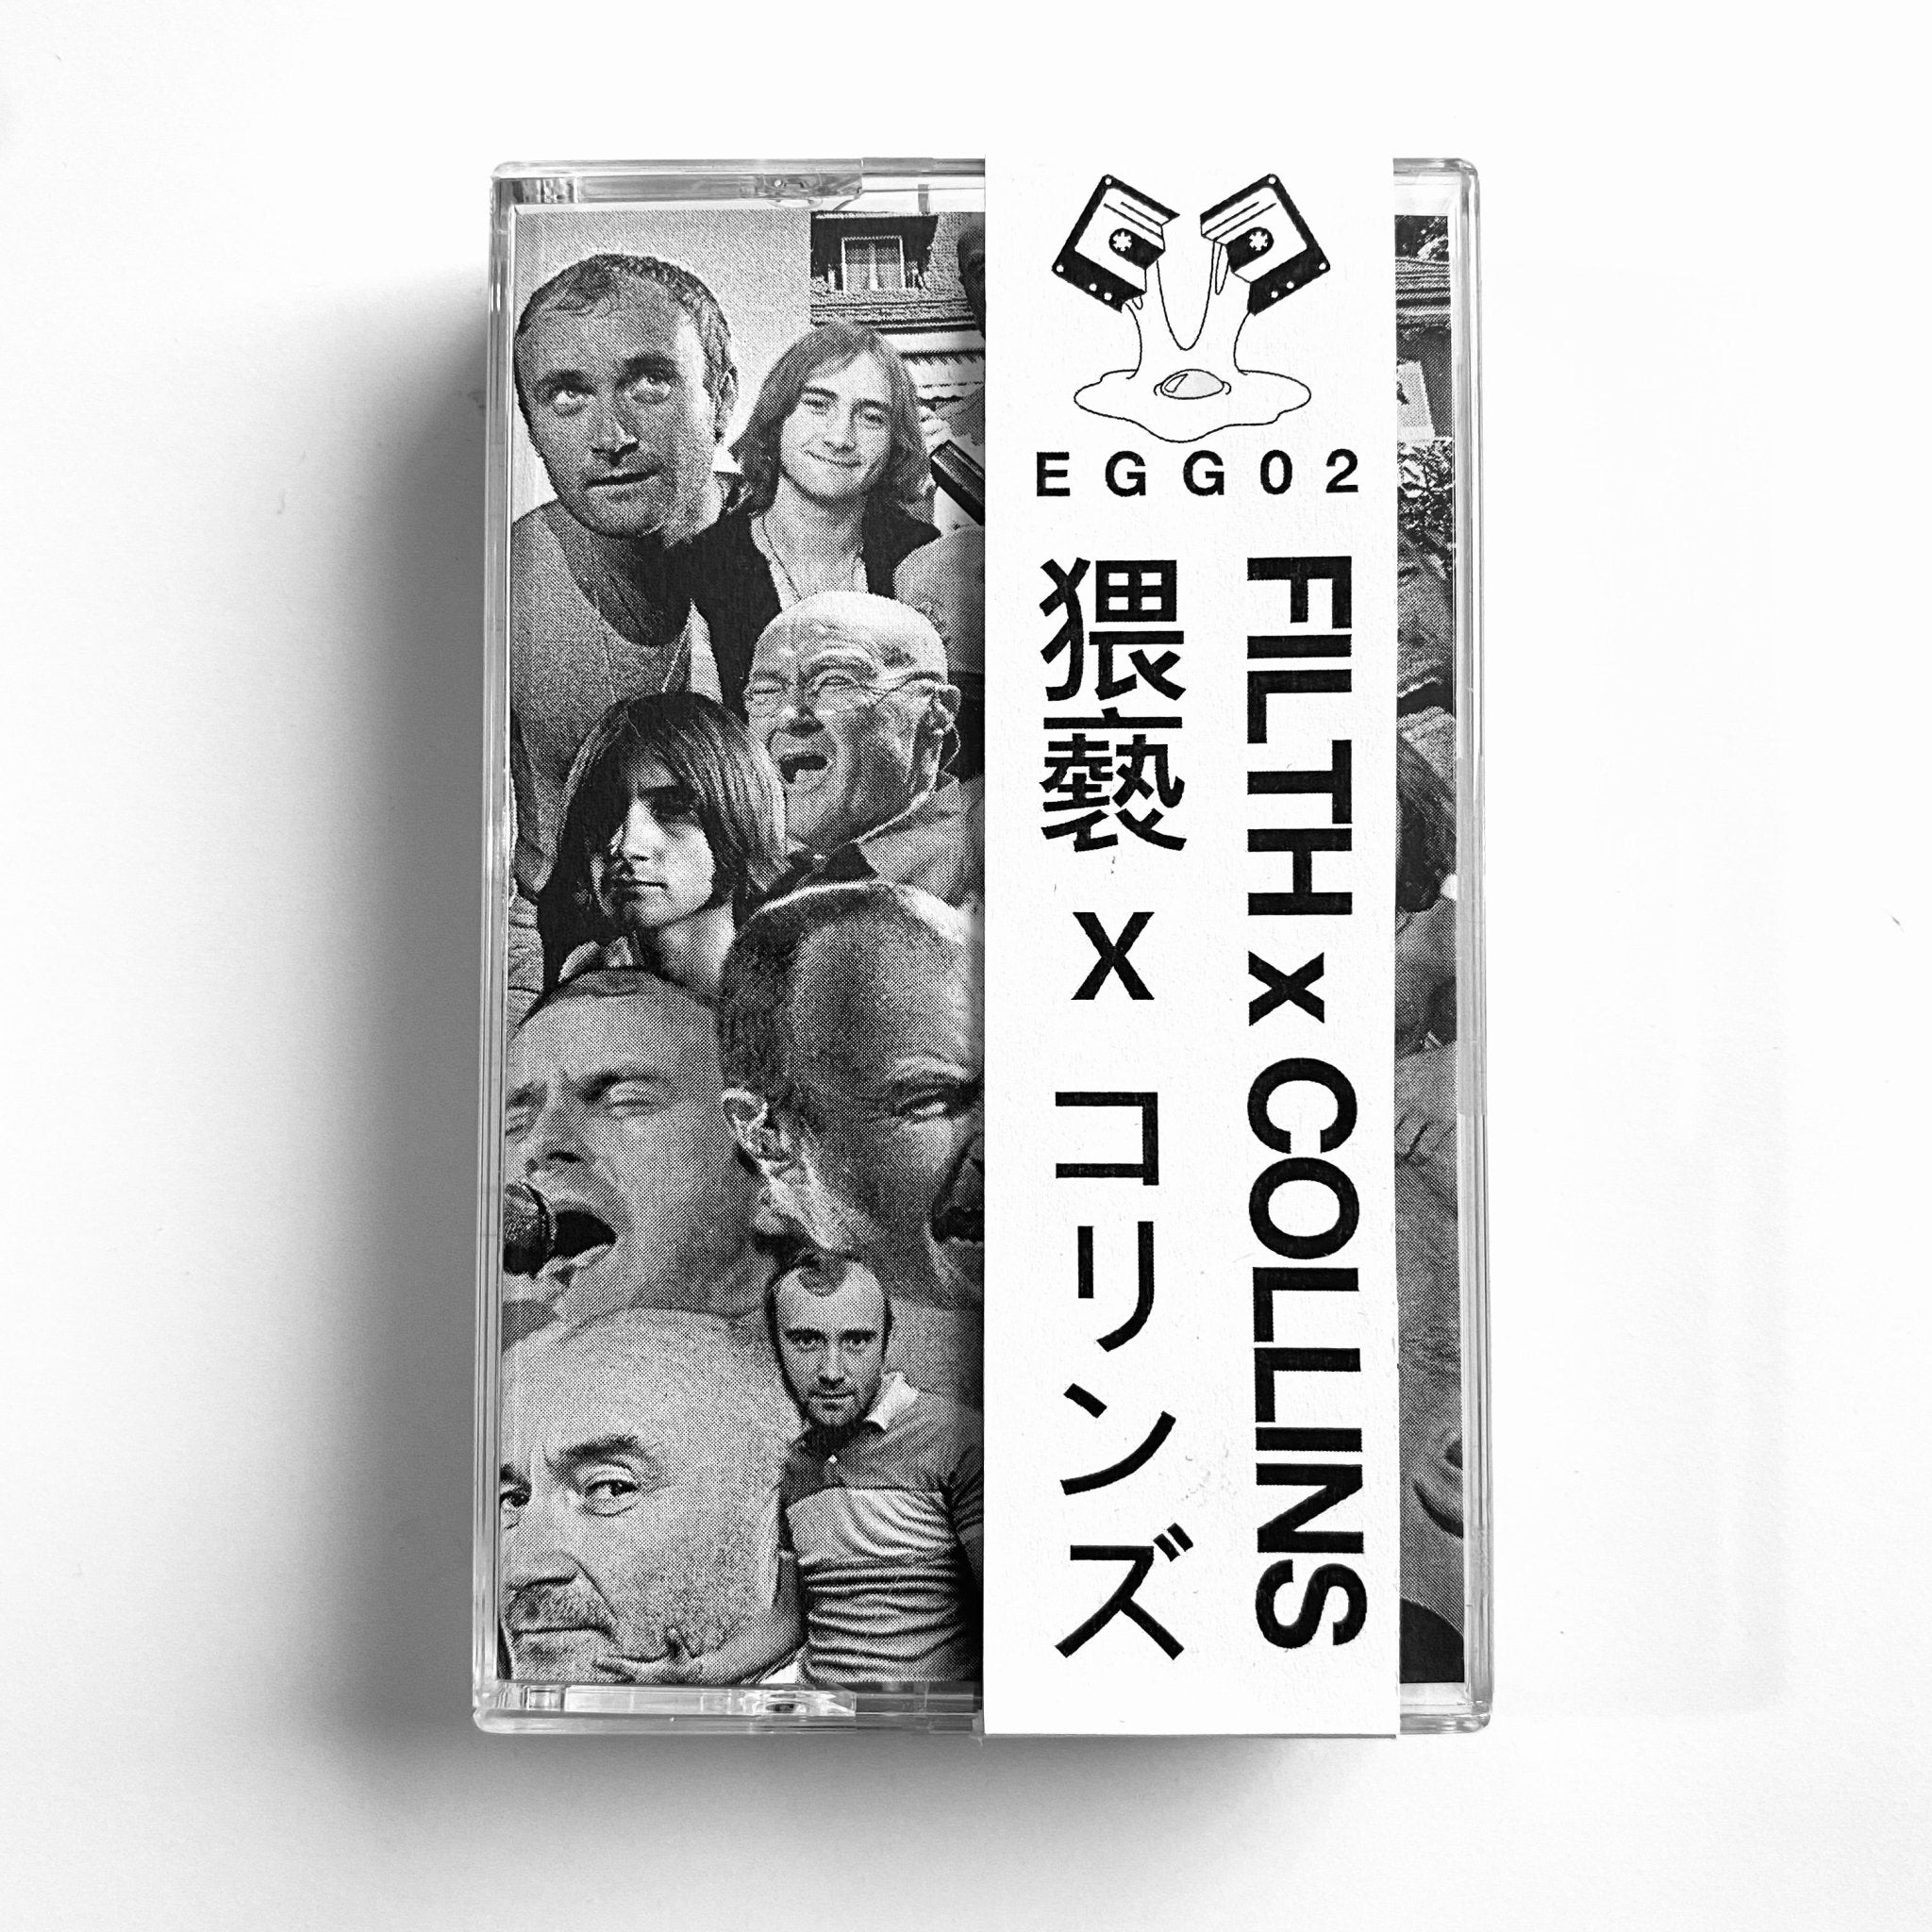 FILTHxCOLLINS - FxC2020 TAPE - Tape - Eggy Tapes